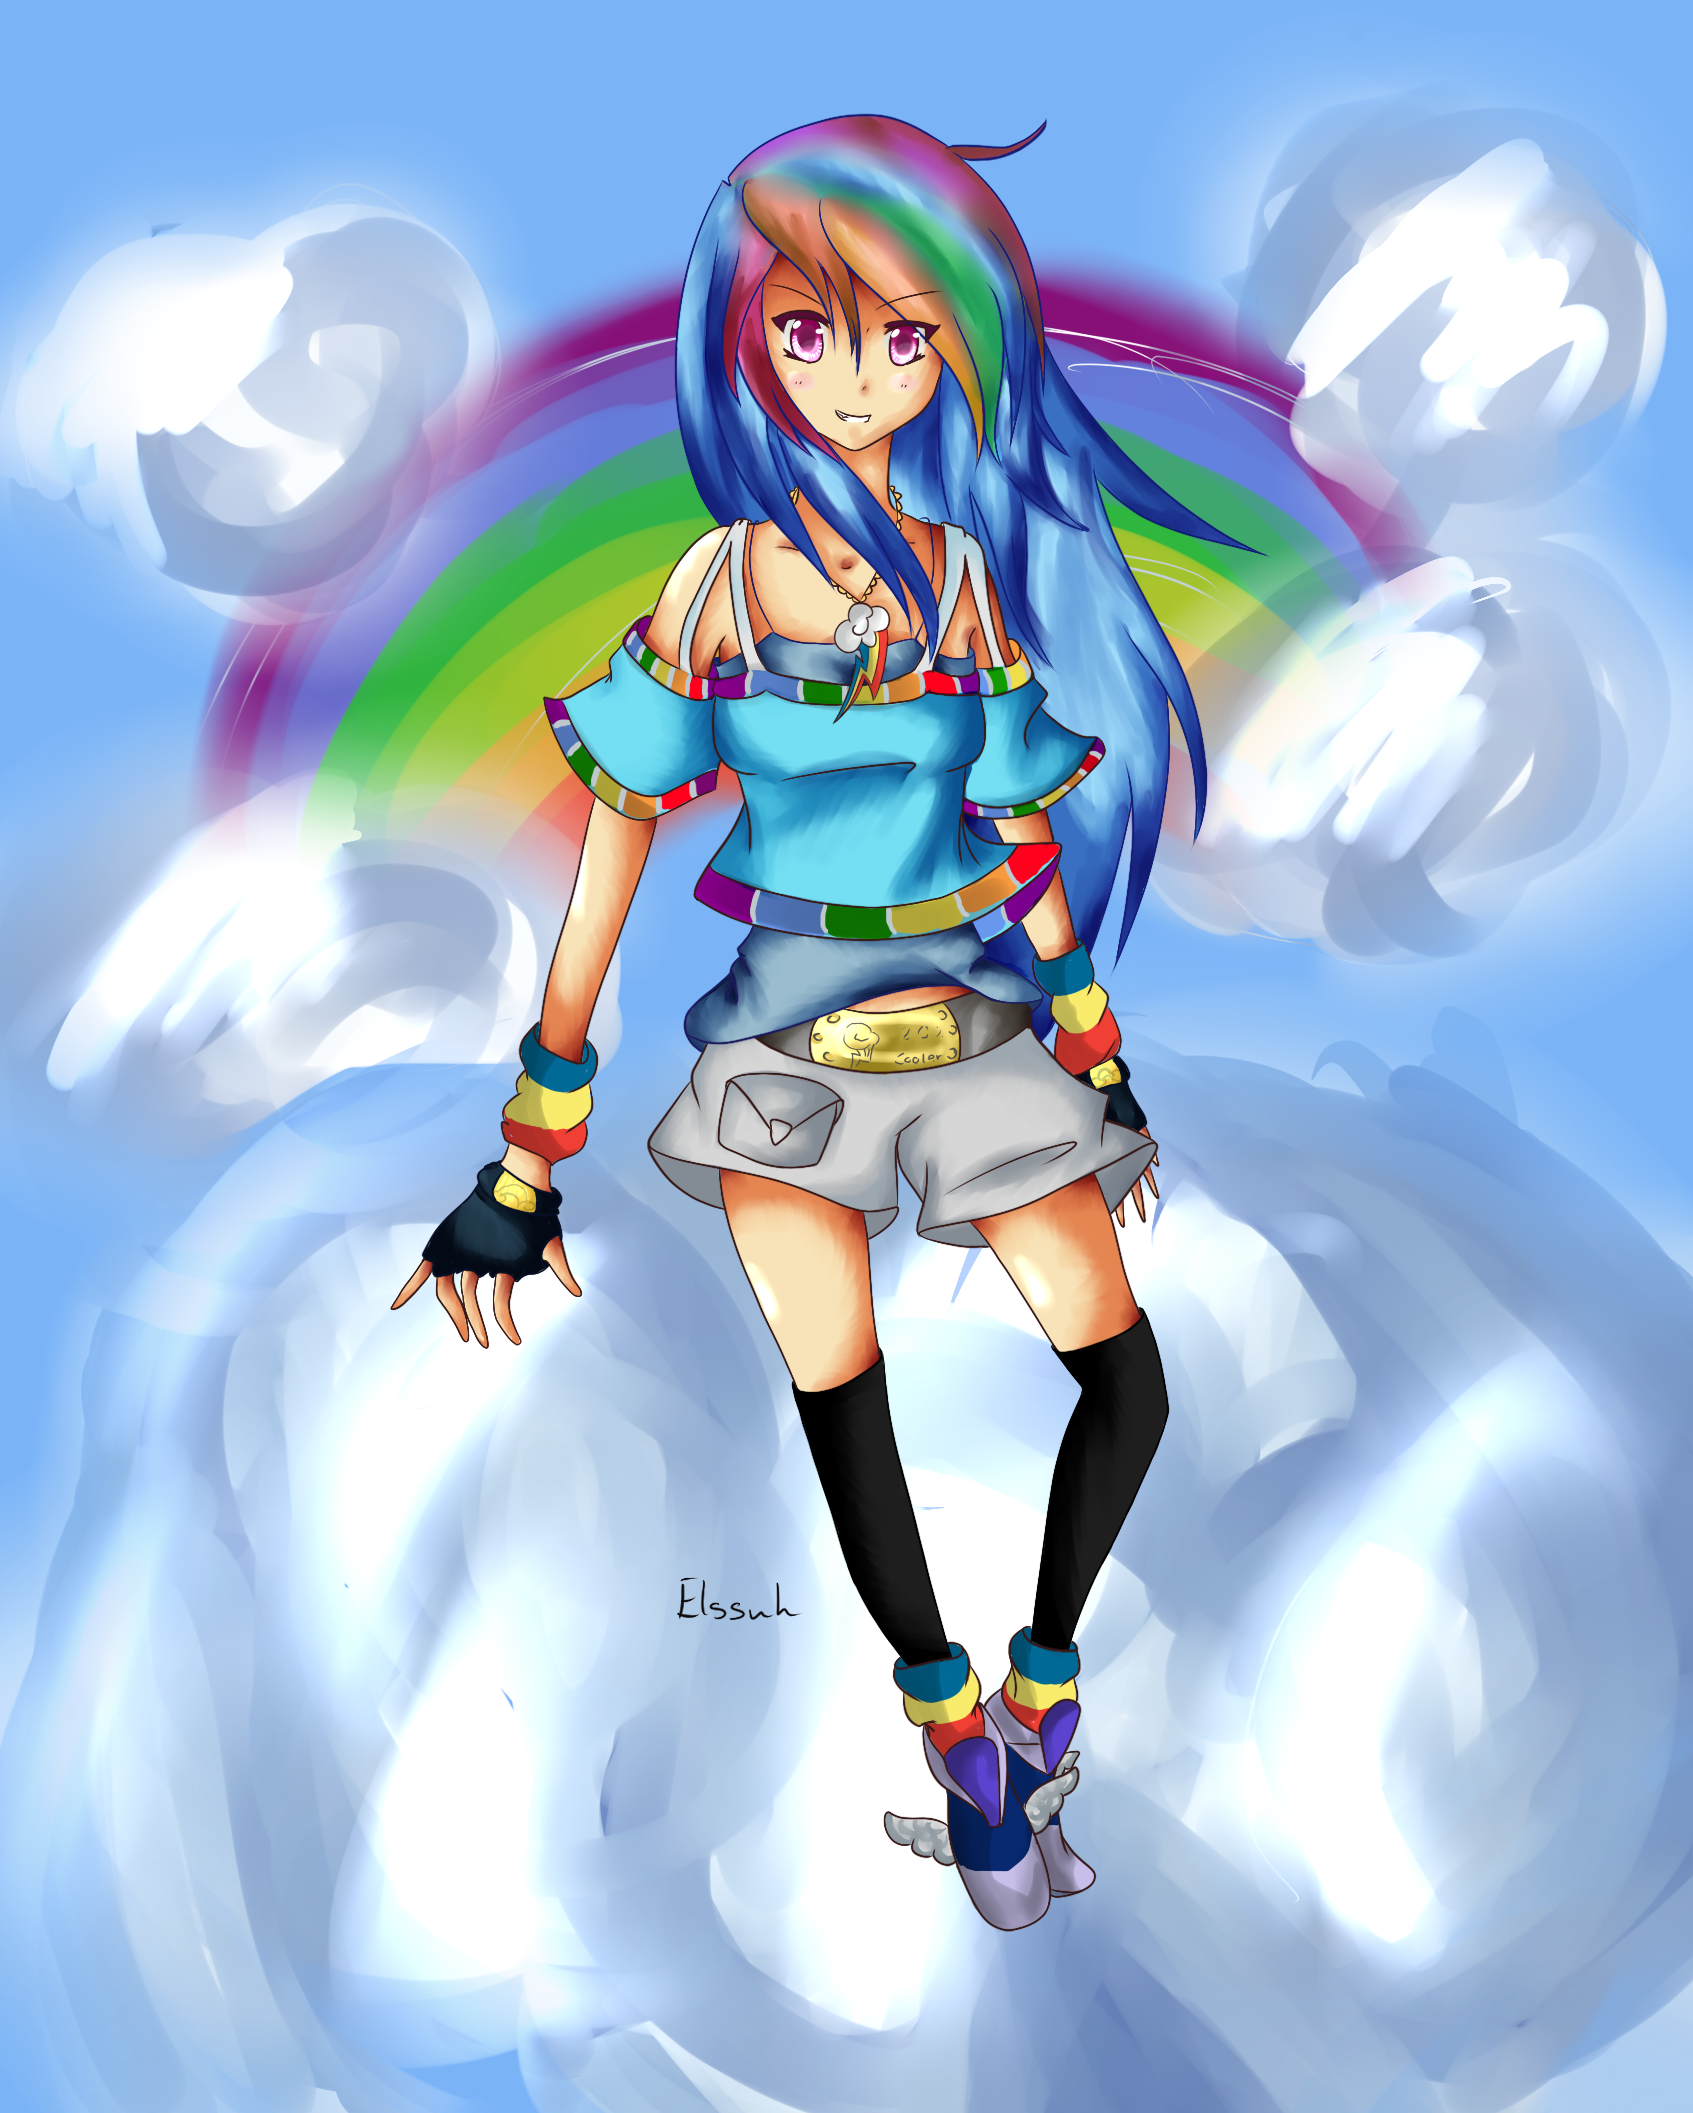 image-rainbow-dash-human-form-png-my-little-pony-fan-labor-wiki